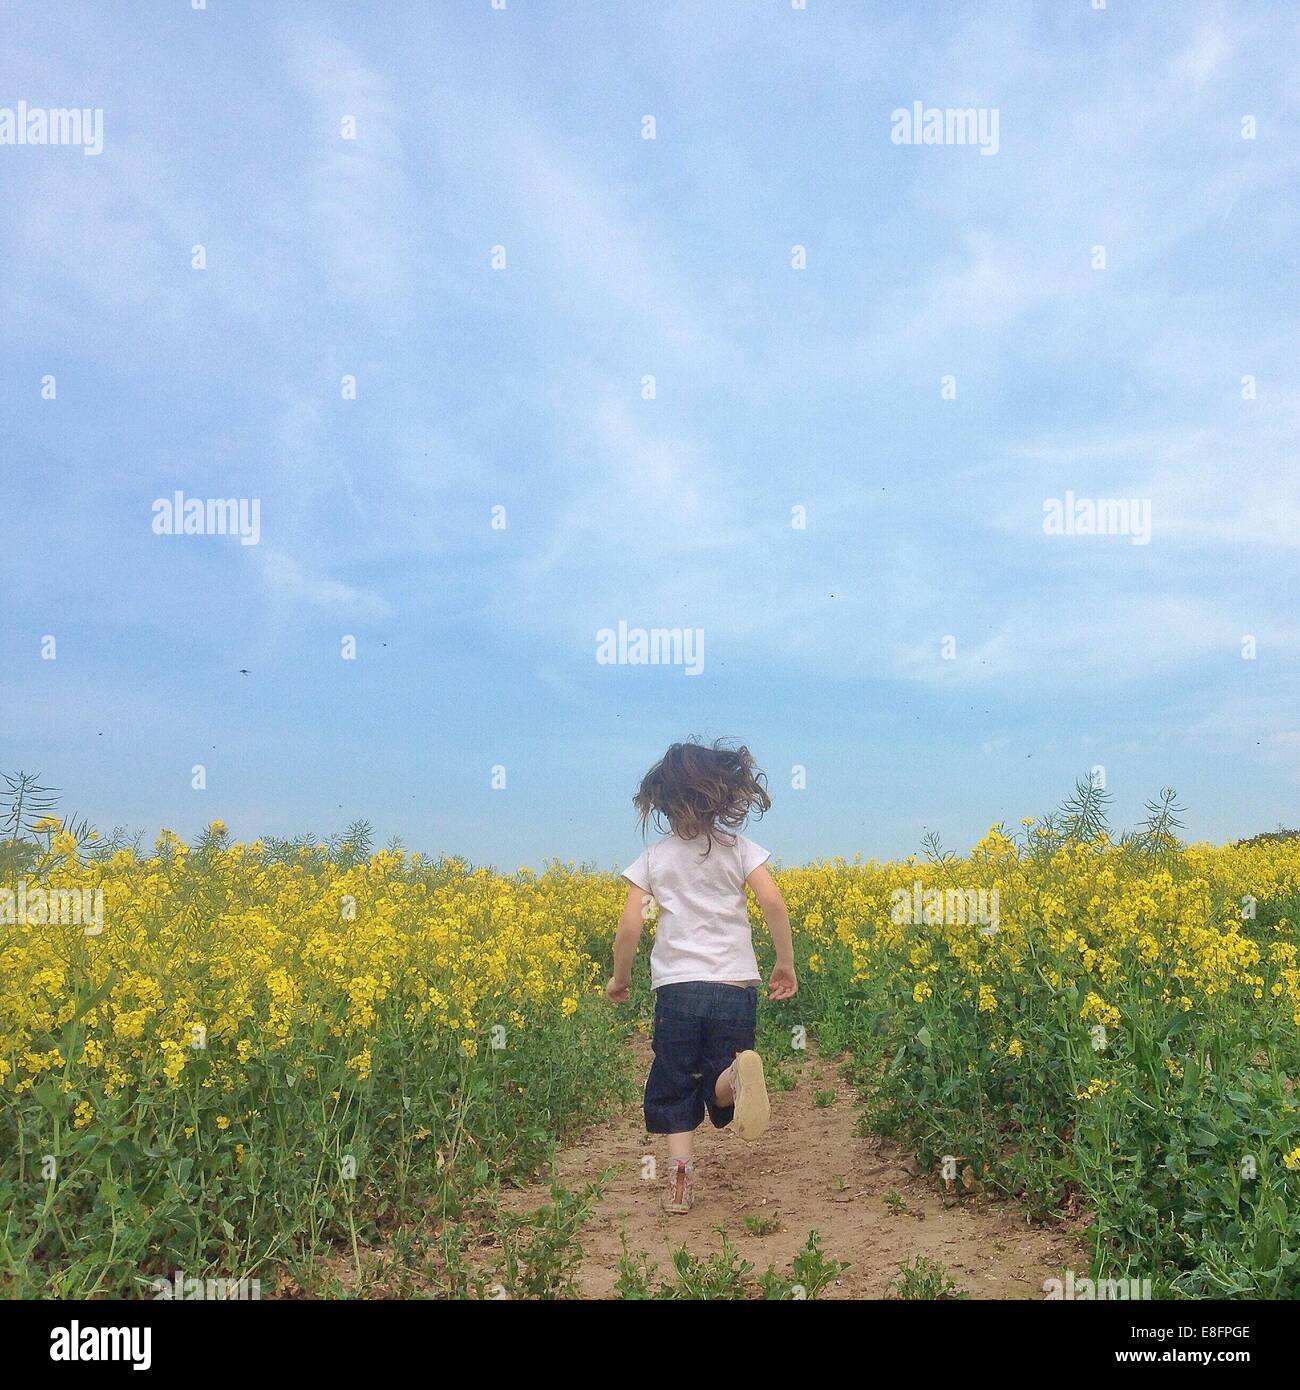 Rear view of girl running through rapeseed field Stock Photo